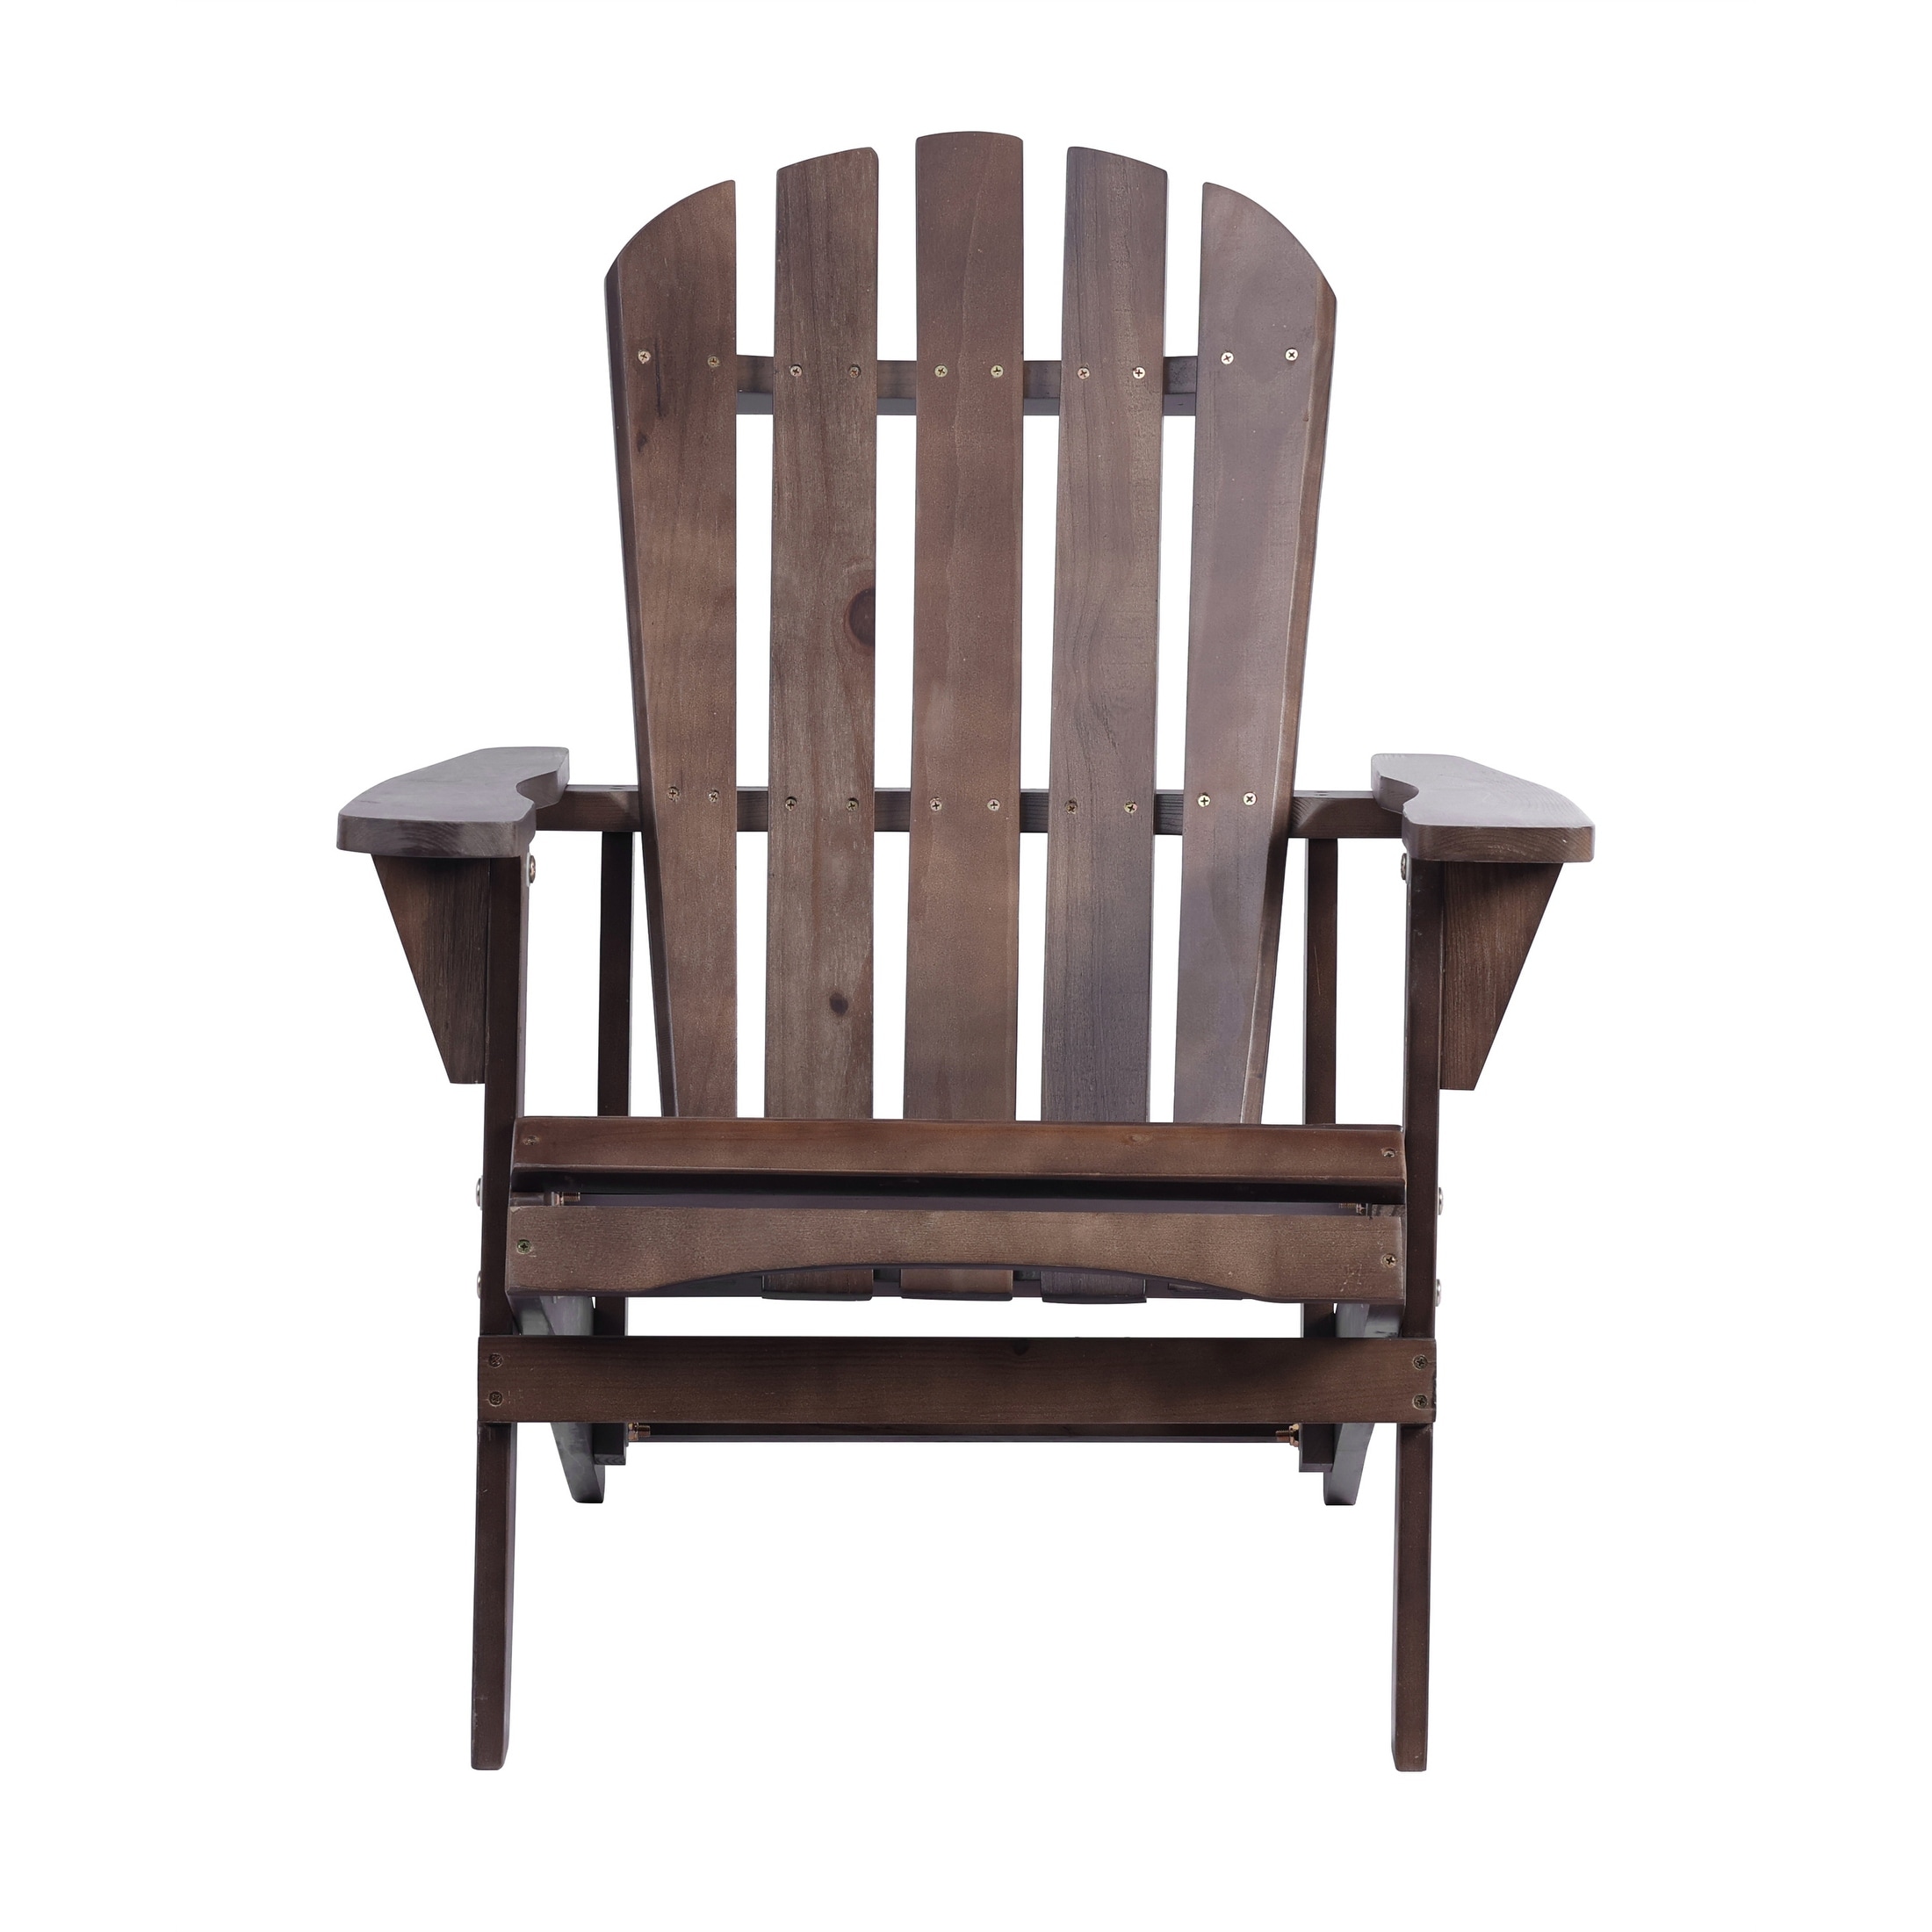 Solid Wood Outdoor Patio Furniture